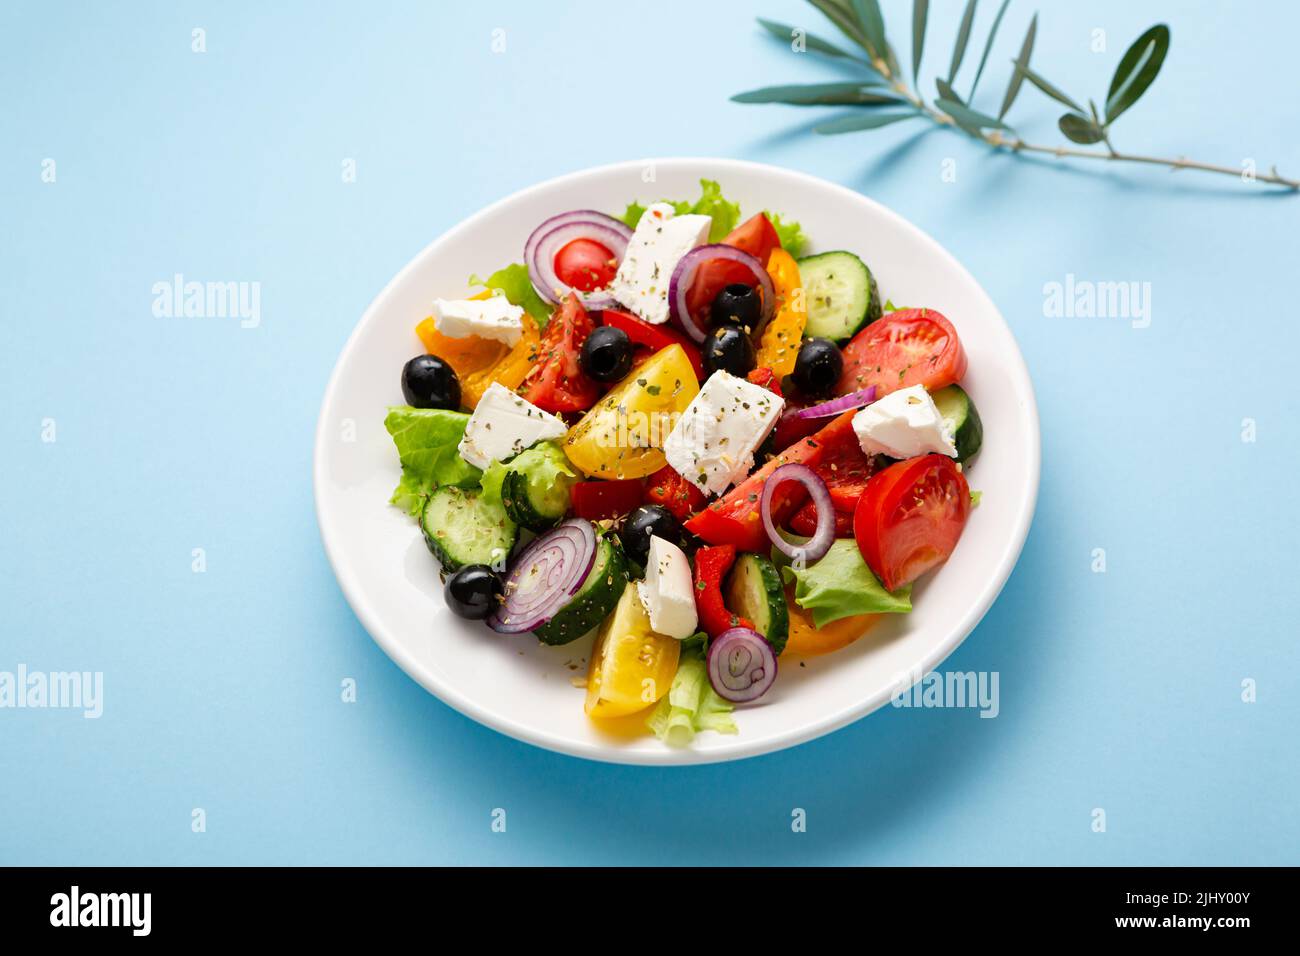 Overhead view of Greek salad on plate on blue surface healthy food Stock Photo